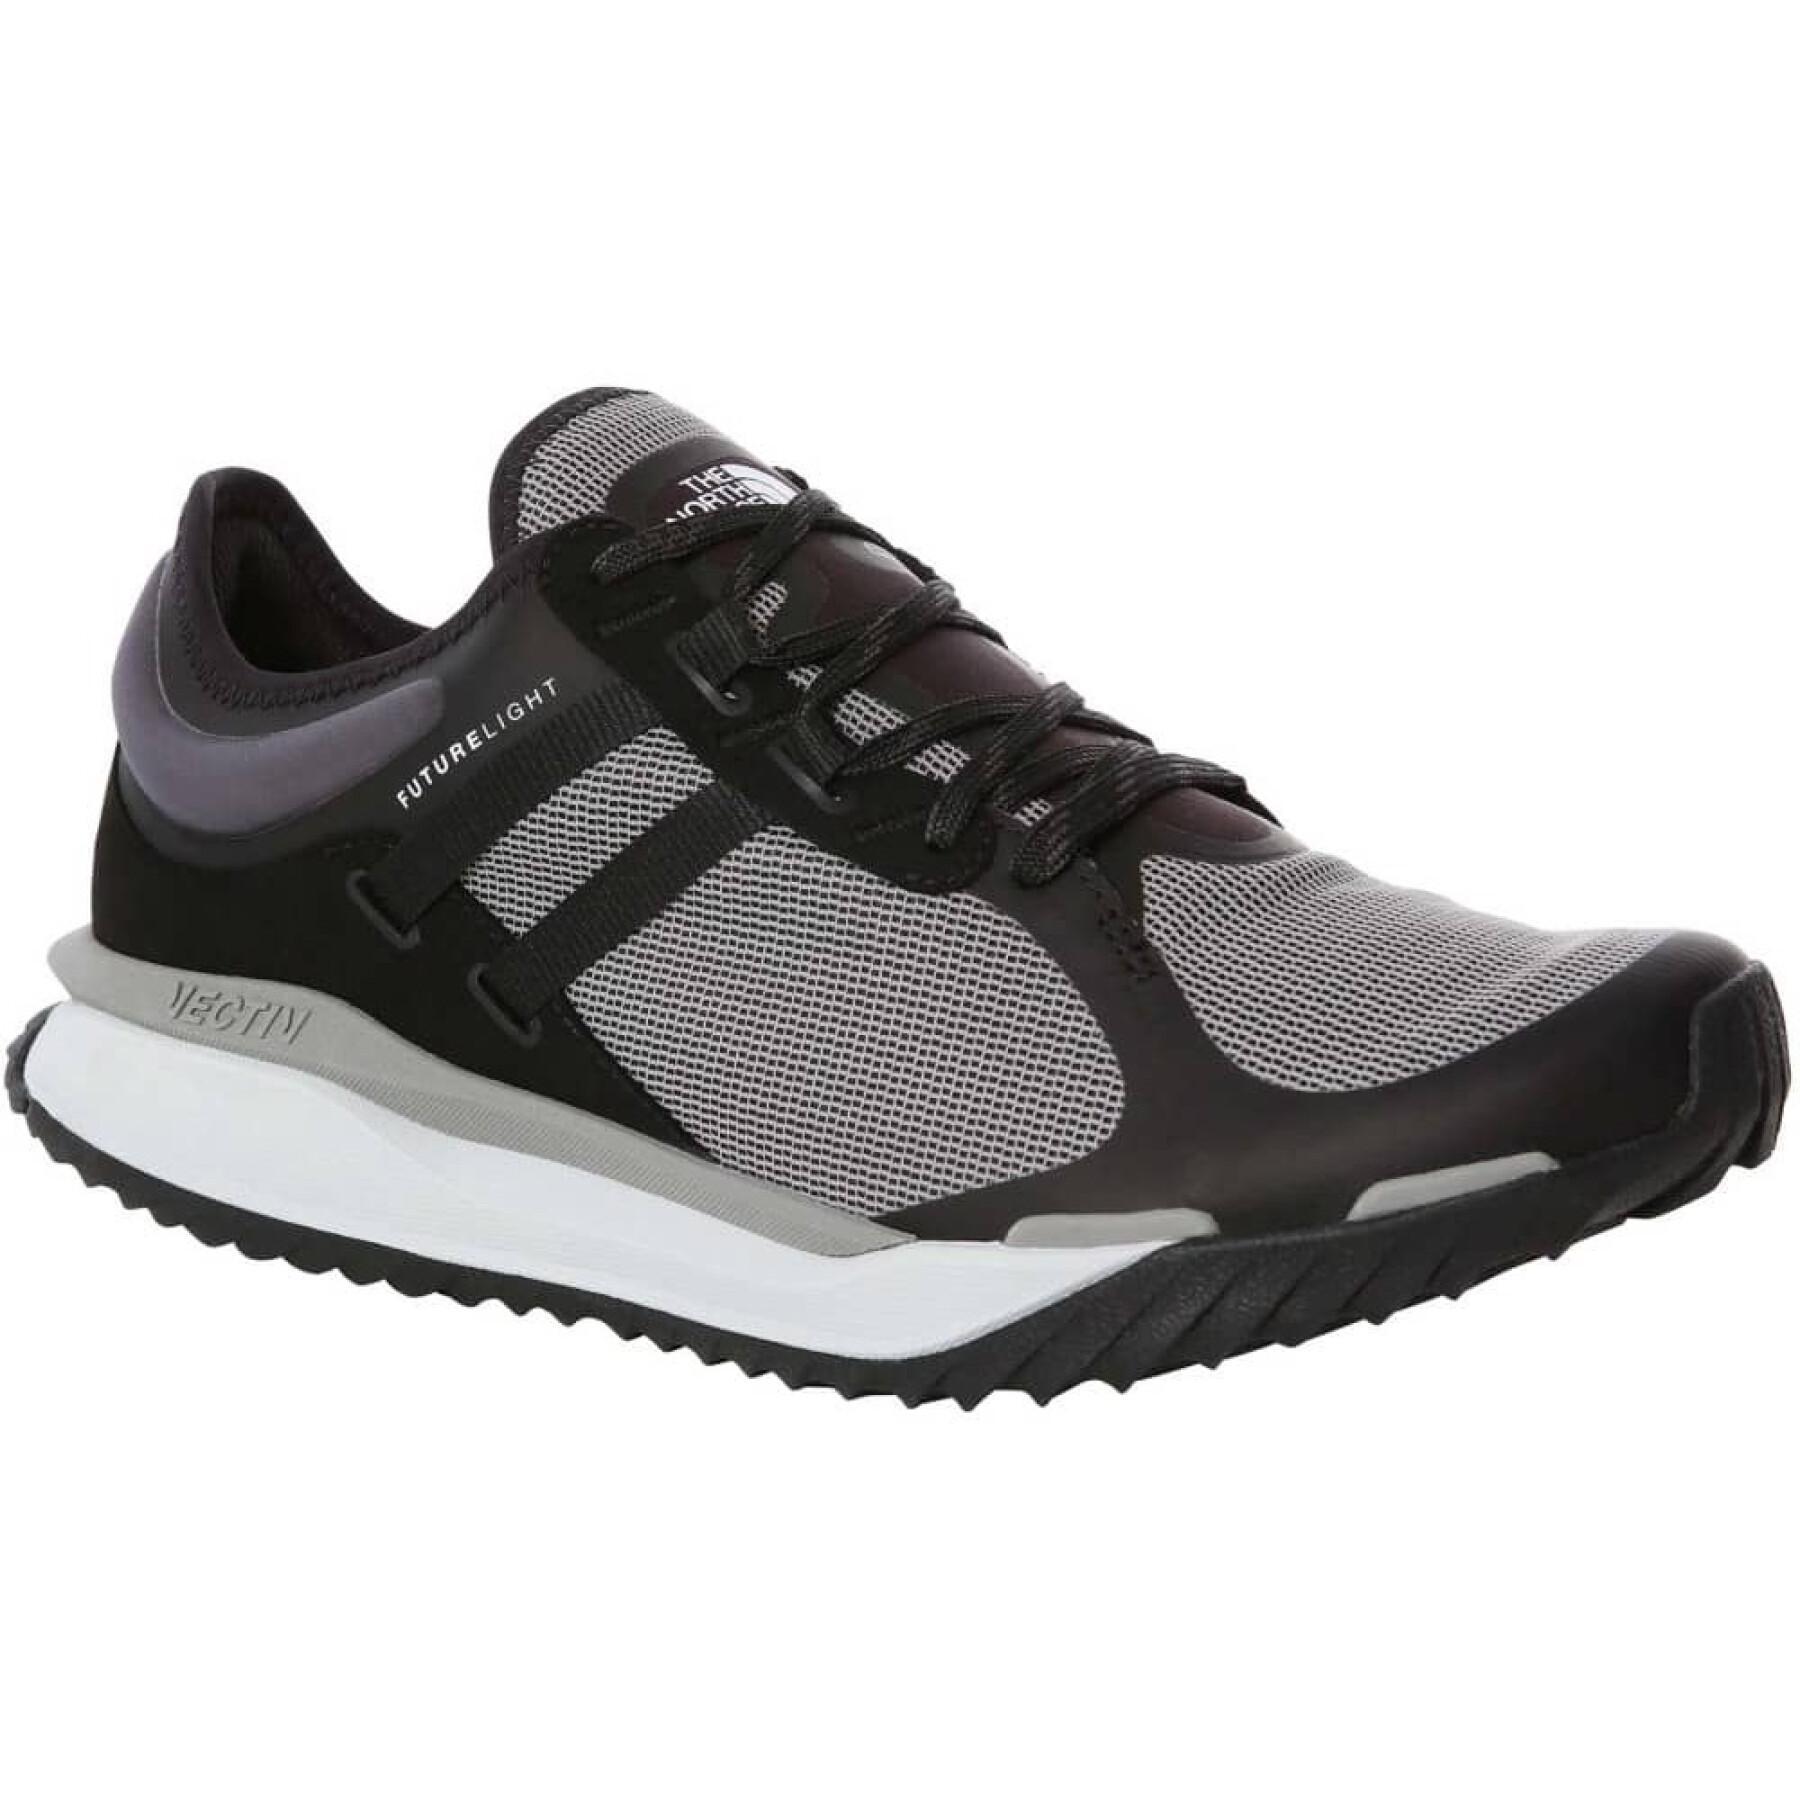 Hiking shoes The North Face Vectiv escape futureLight™ reflect